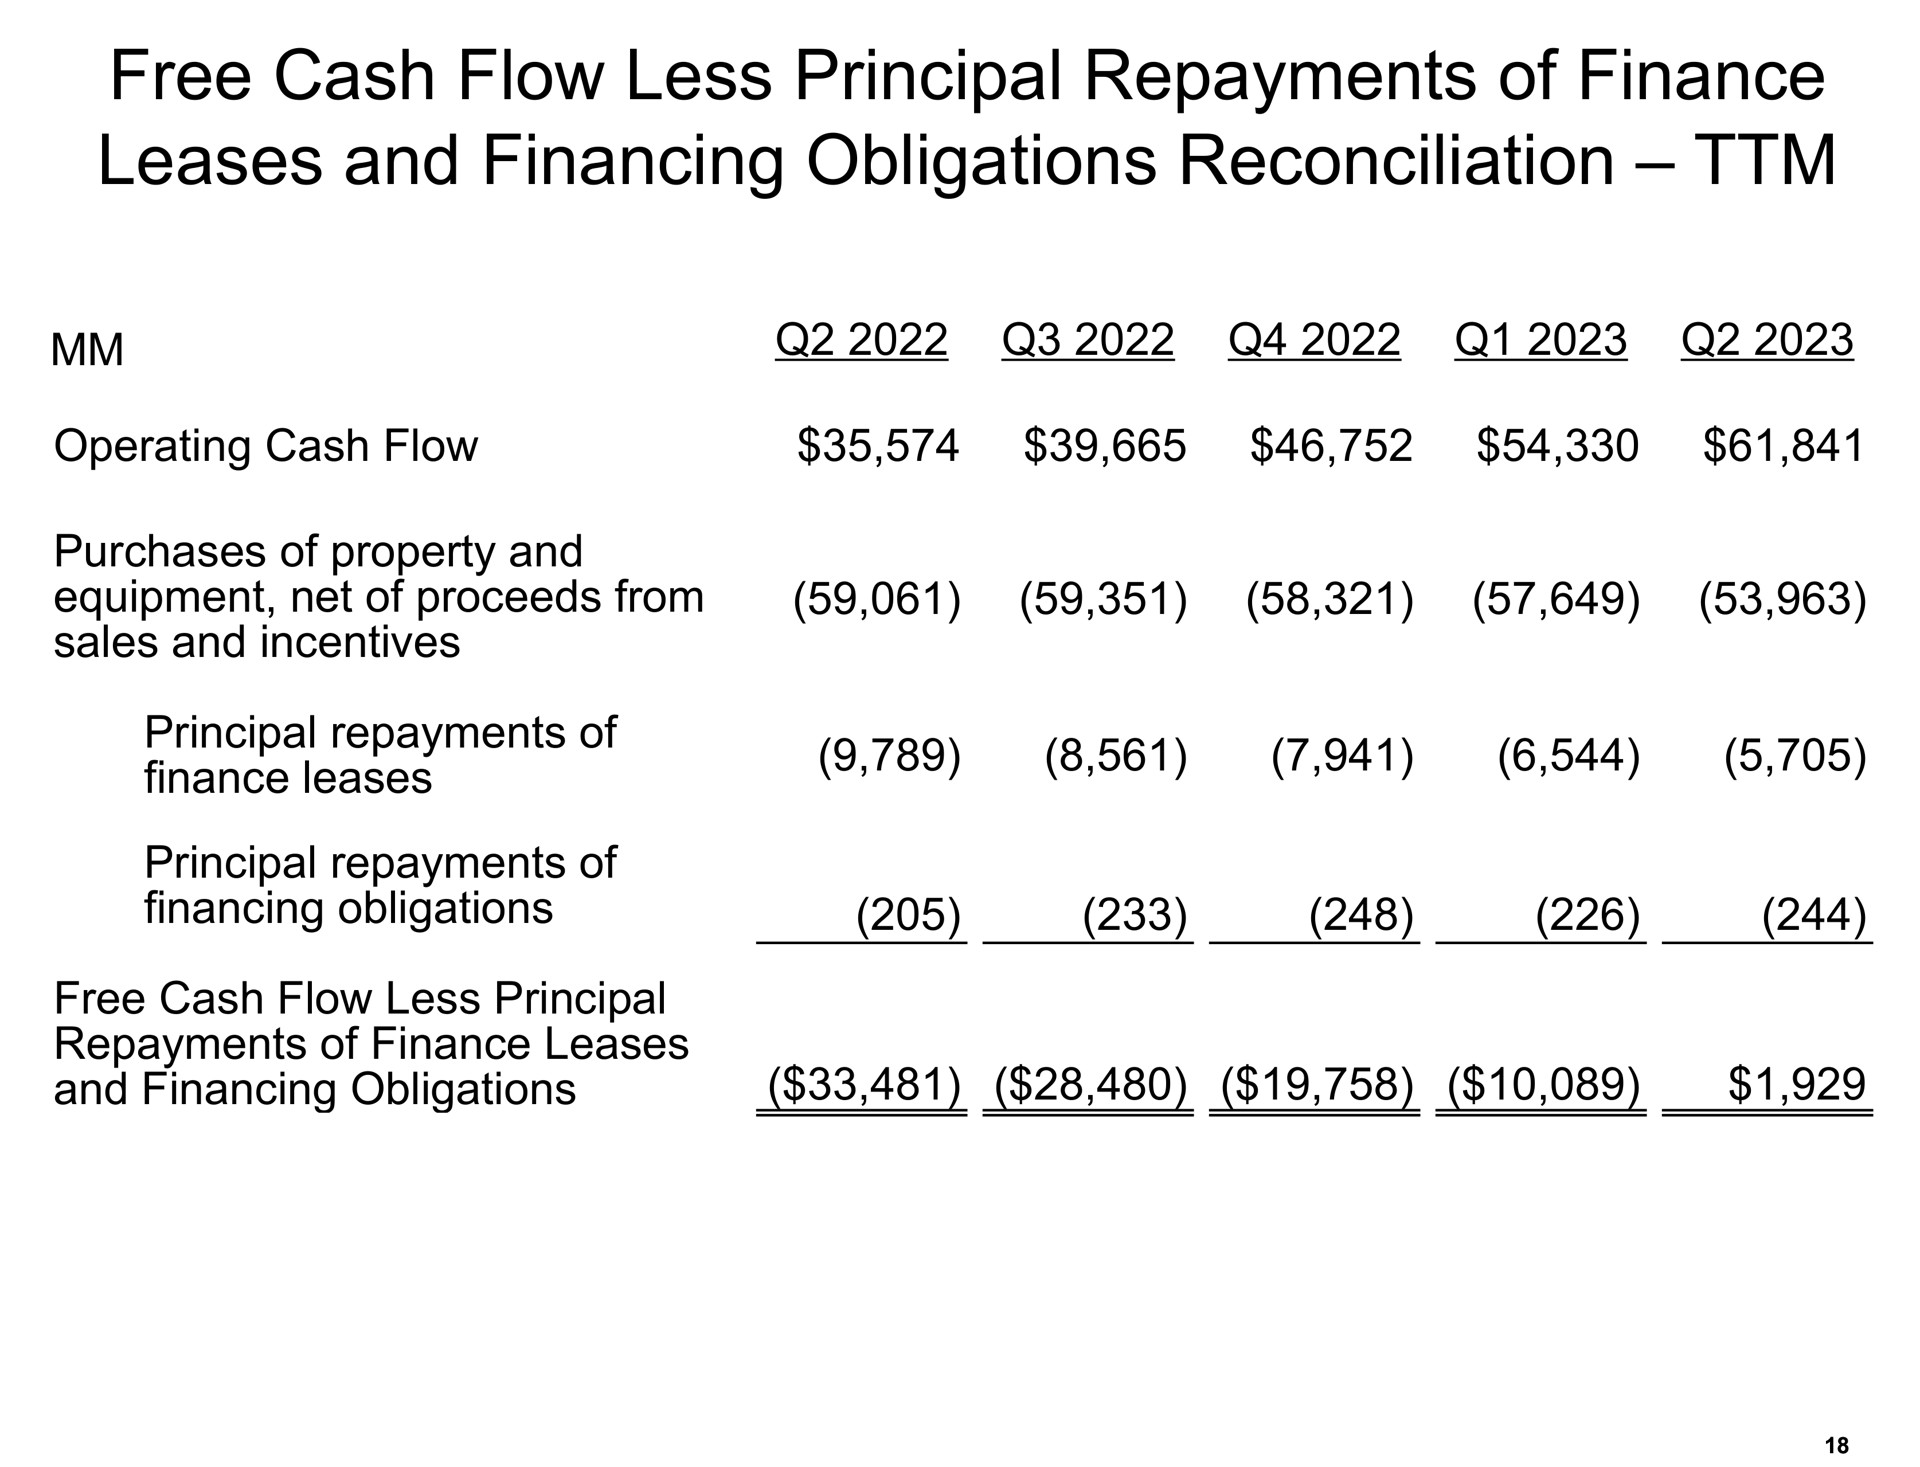 free cash flow less principal repayments of finance leases and financing obligations reconciliation | Amazon